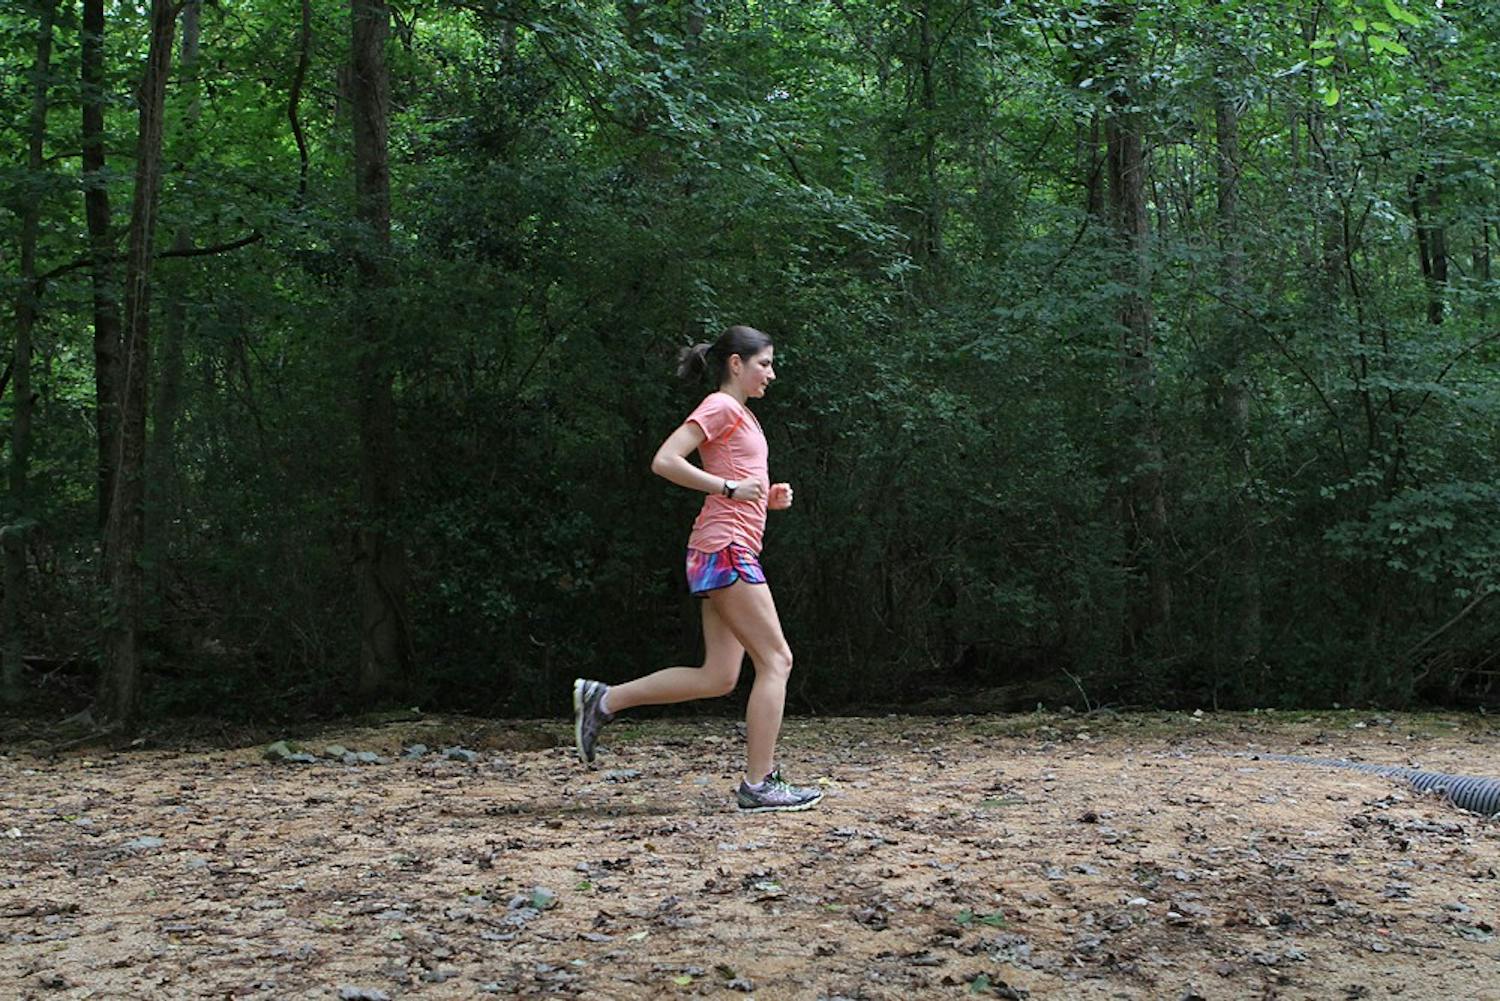 Mariana Lucena runs at the UNC Cross Country Course at Finley Fields.